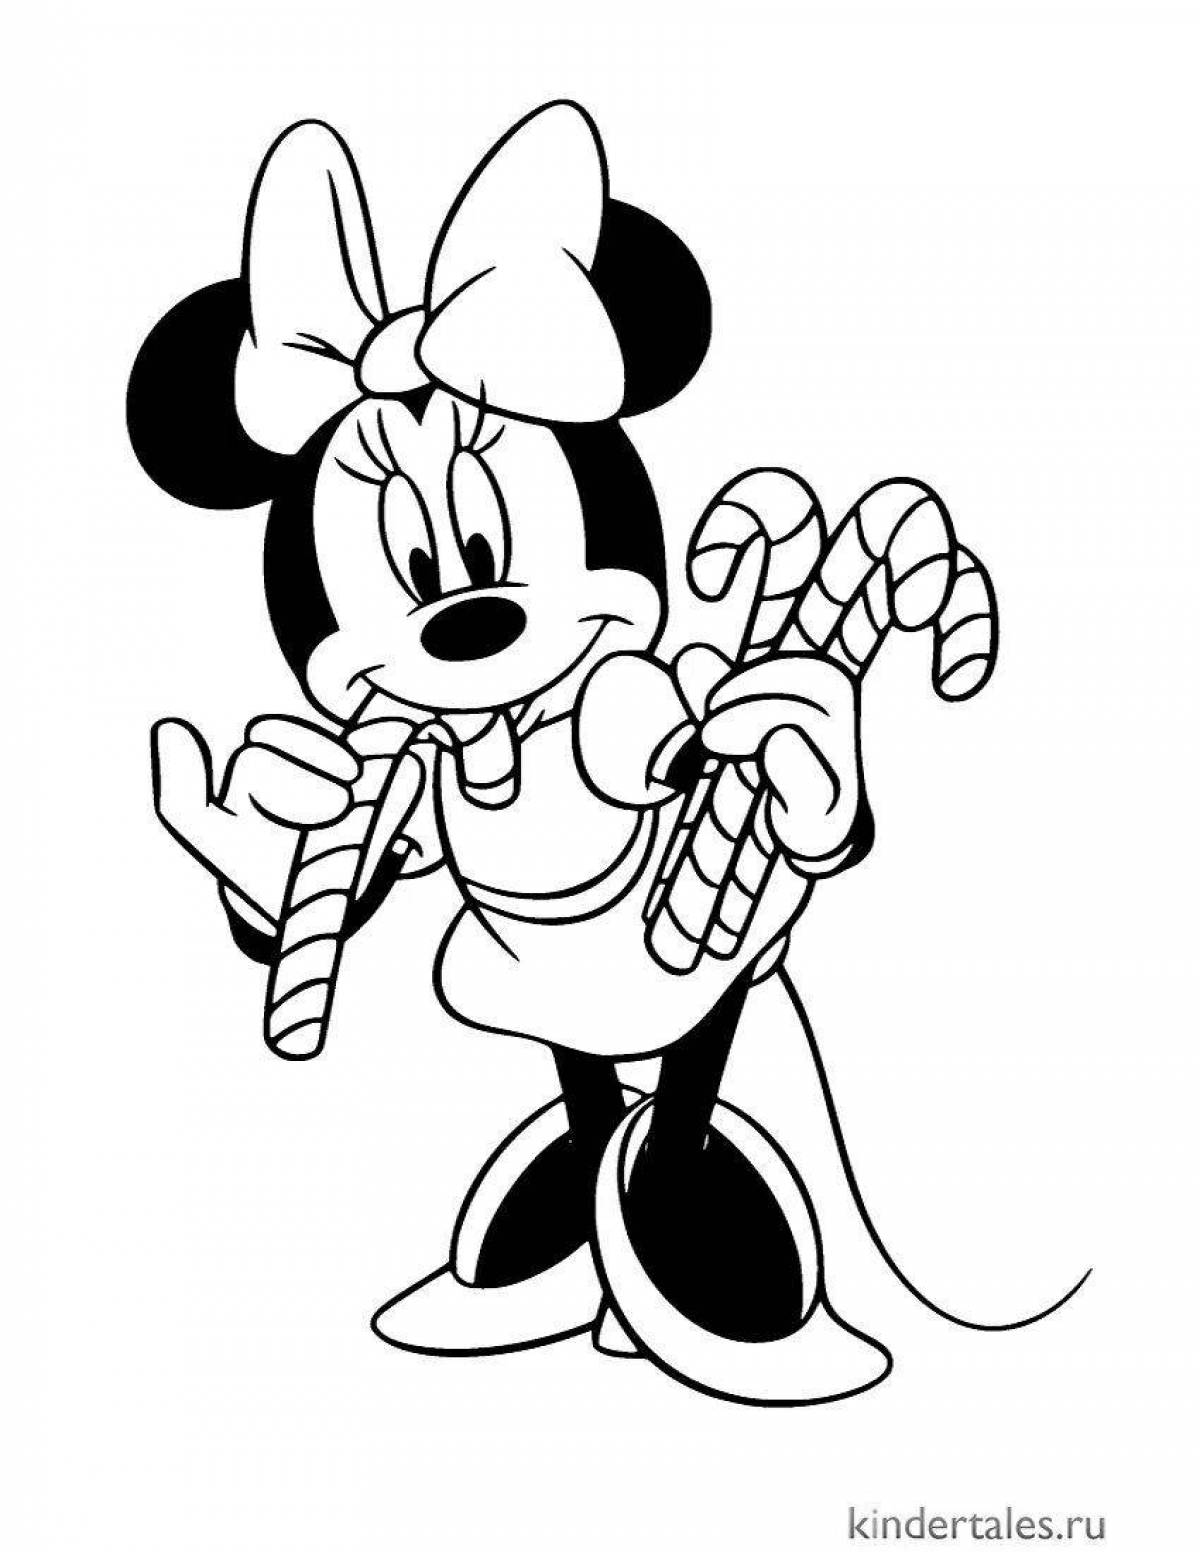 Naughty mouse cartoon coloring book